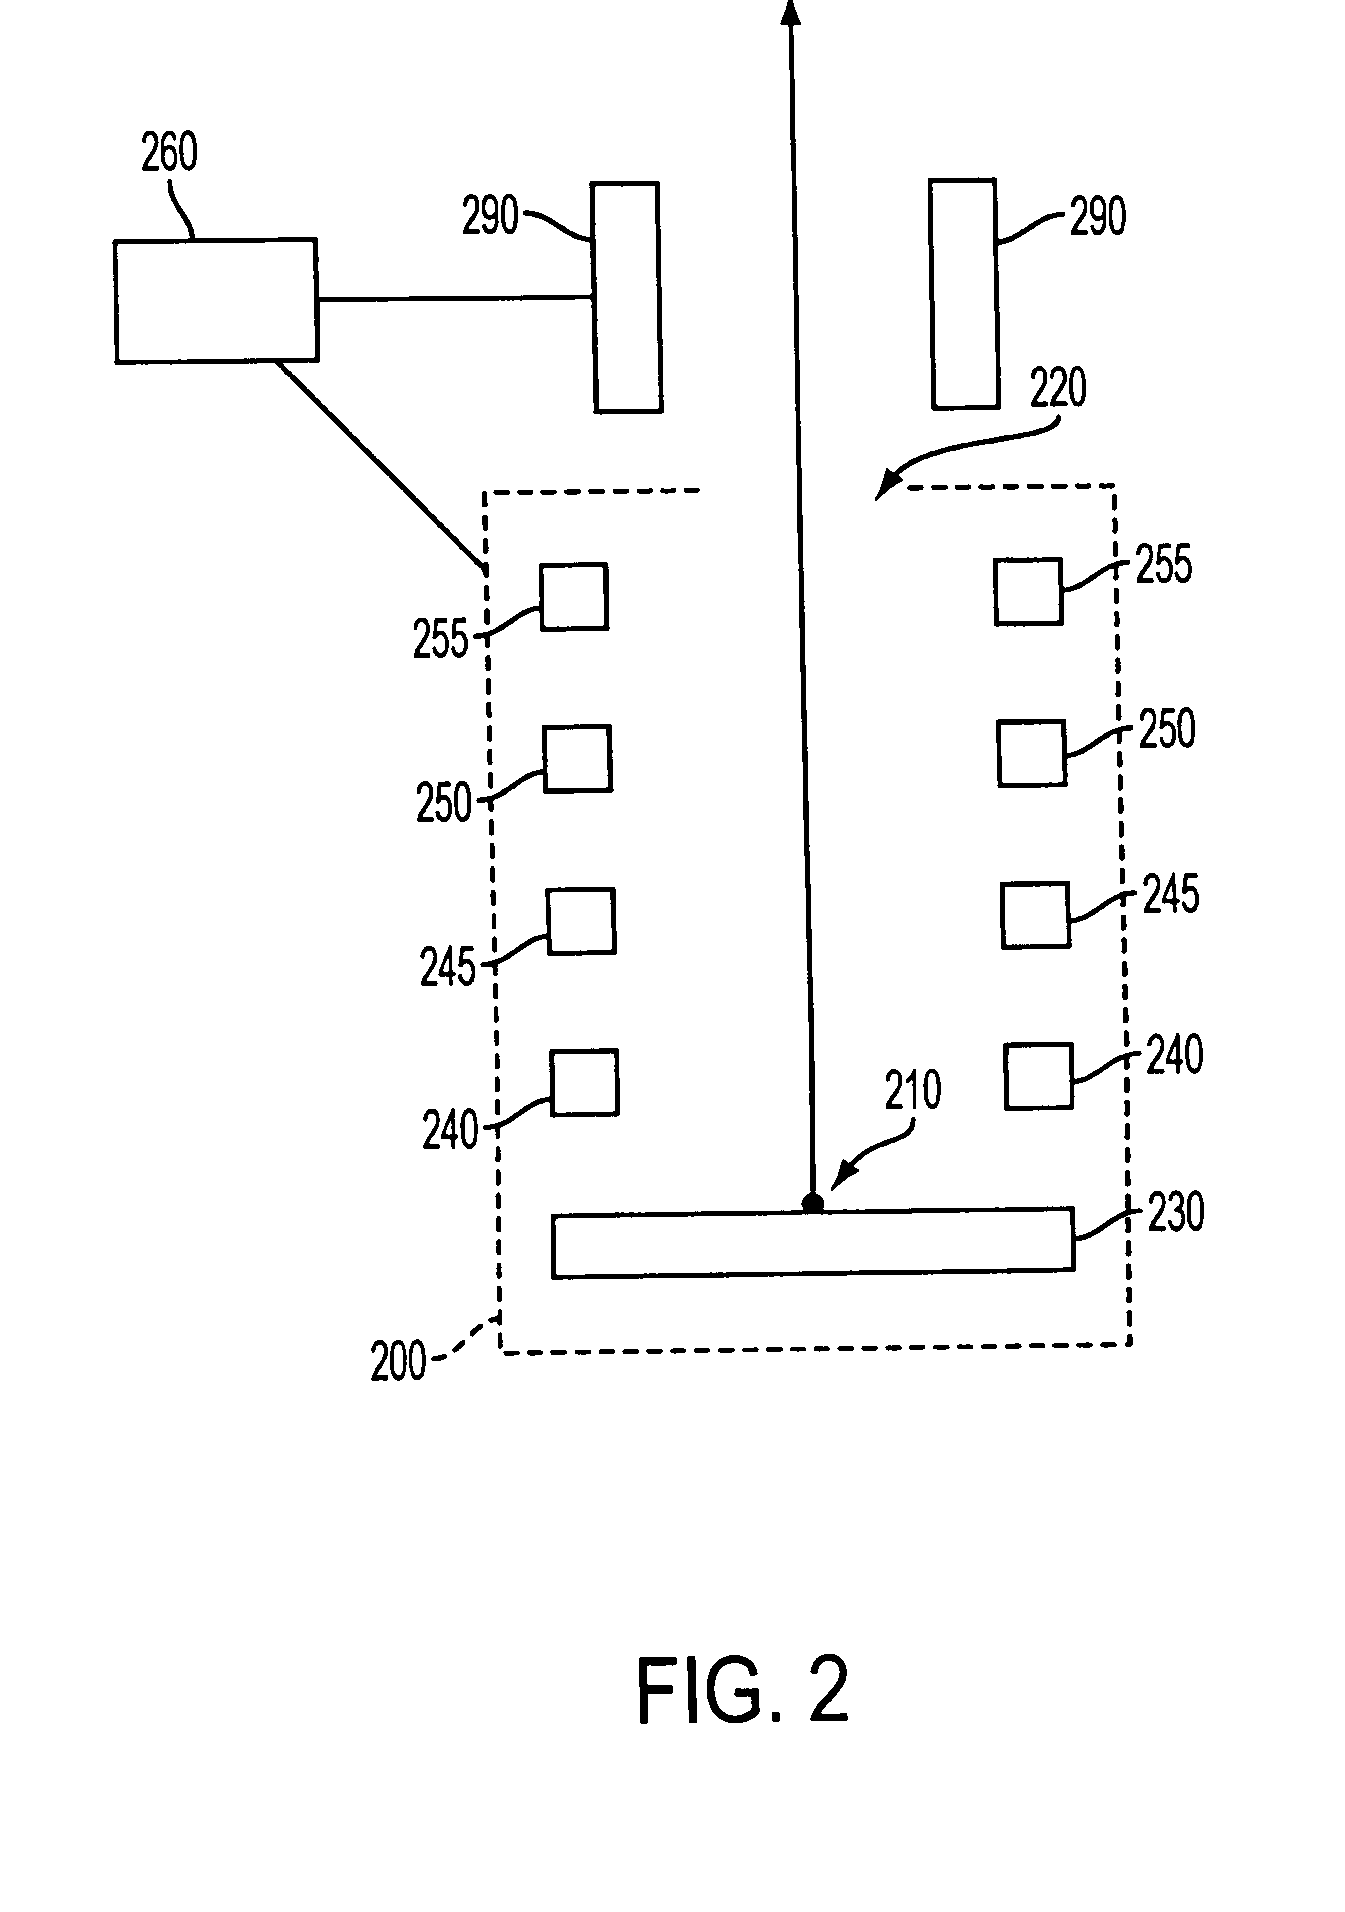 Methods and apparatus for controlling ion current in an ion transmission device